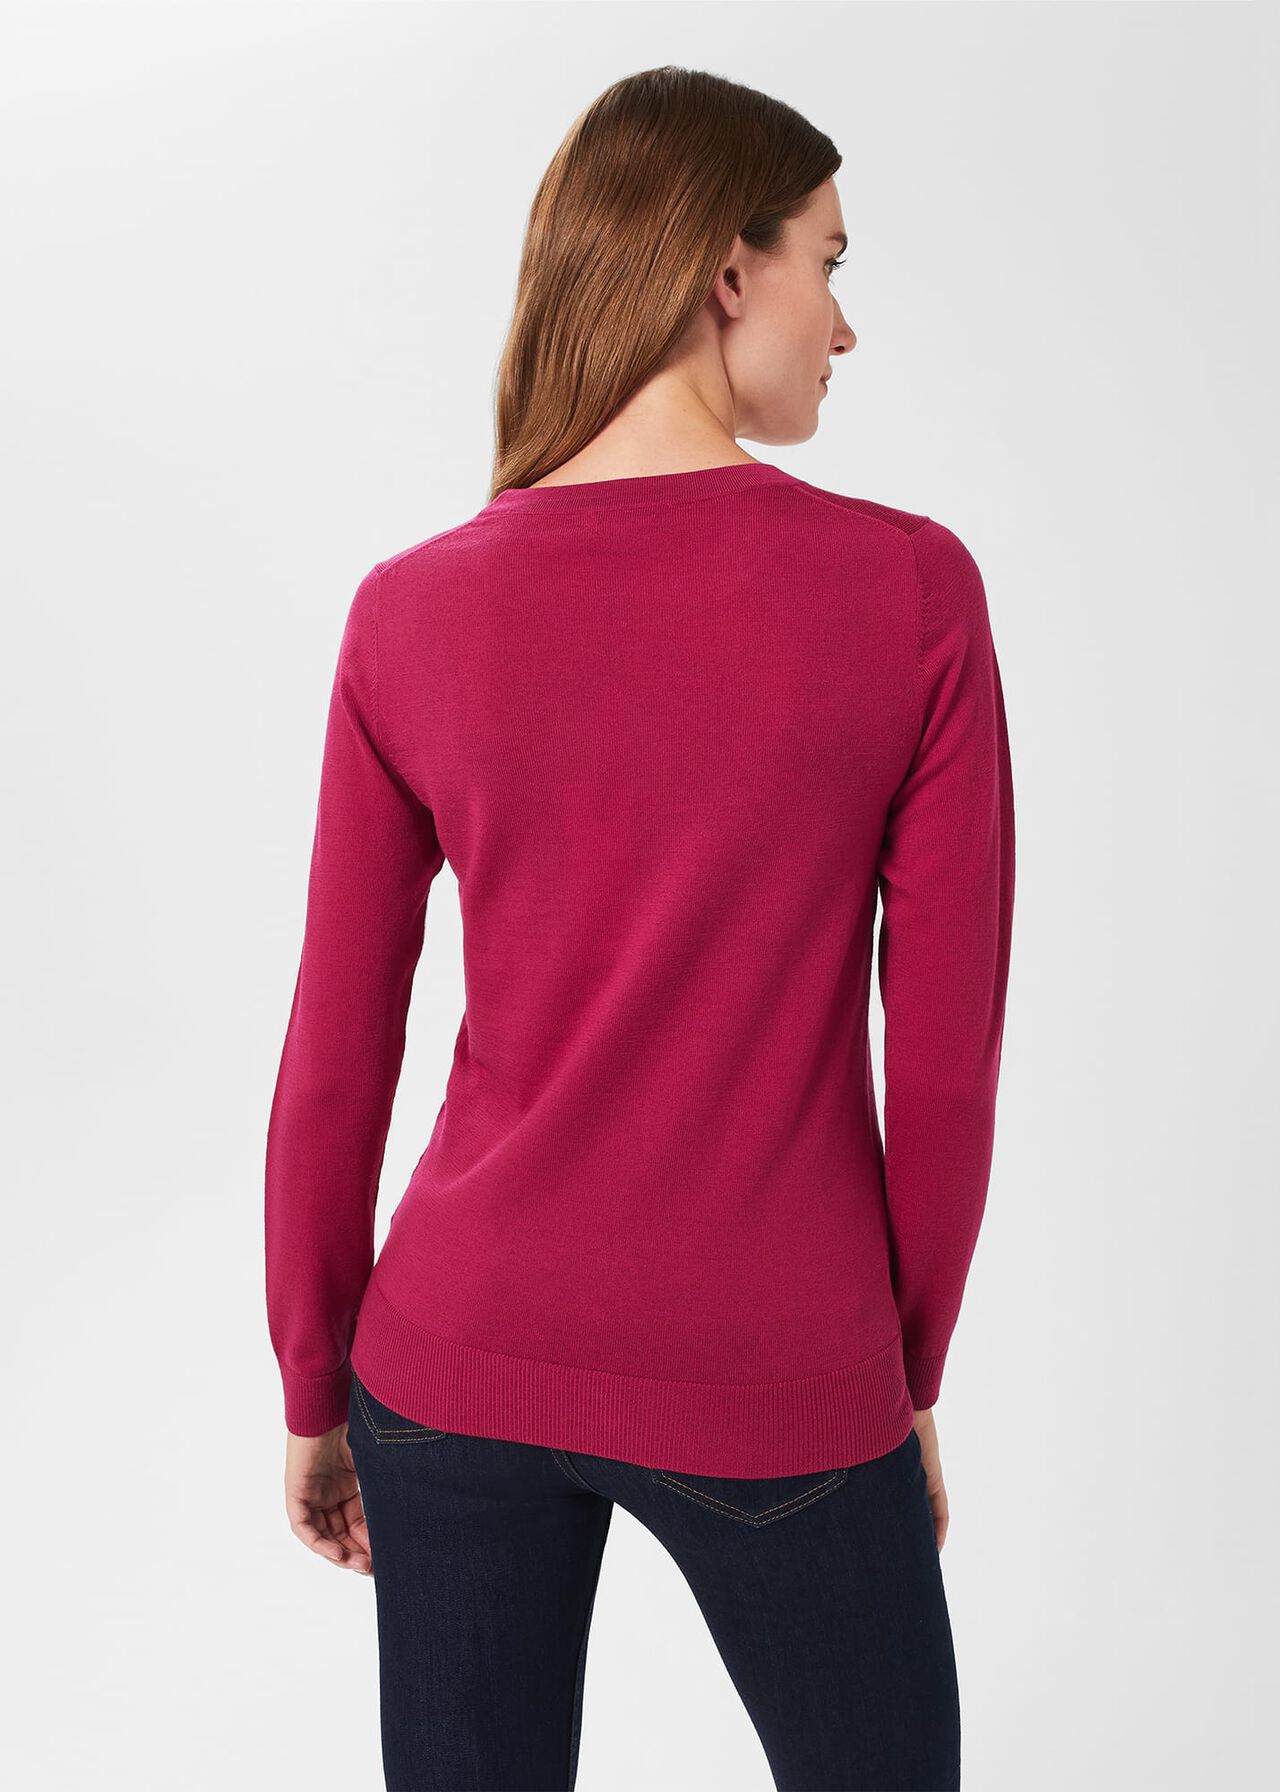 Penny Merino Wool Jumper, Rich Berry Red, hi-res